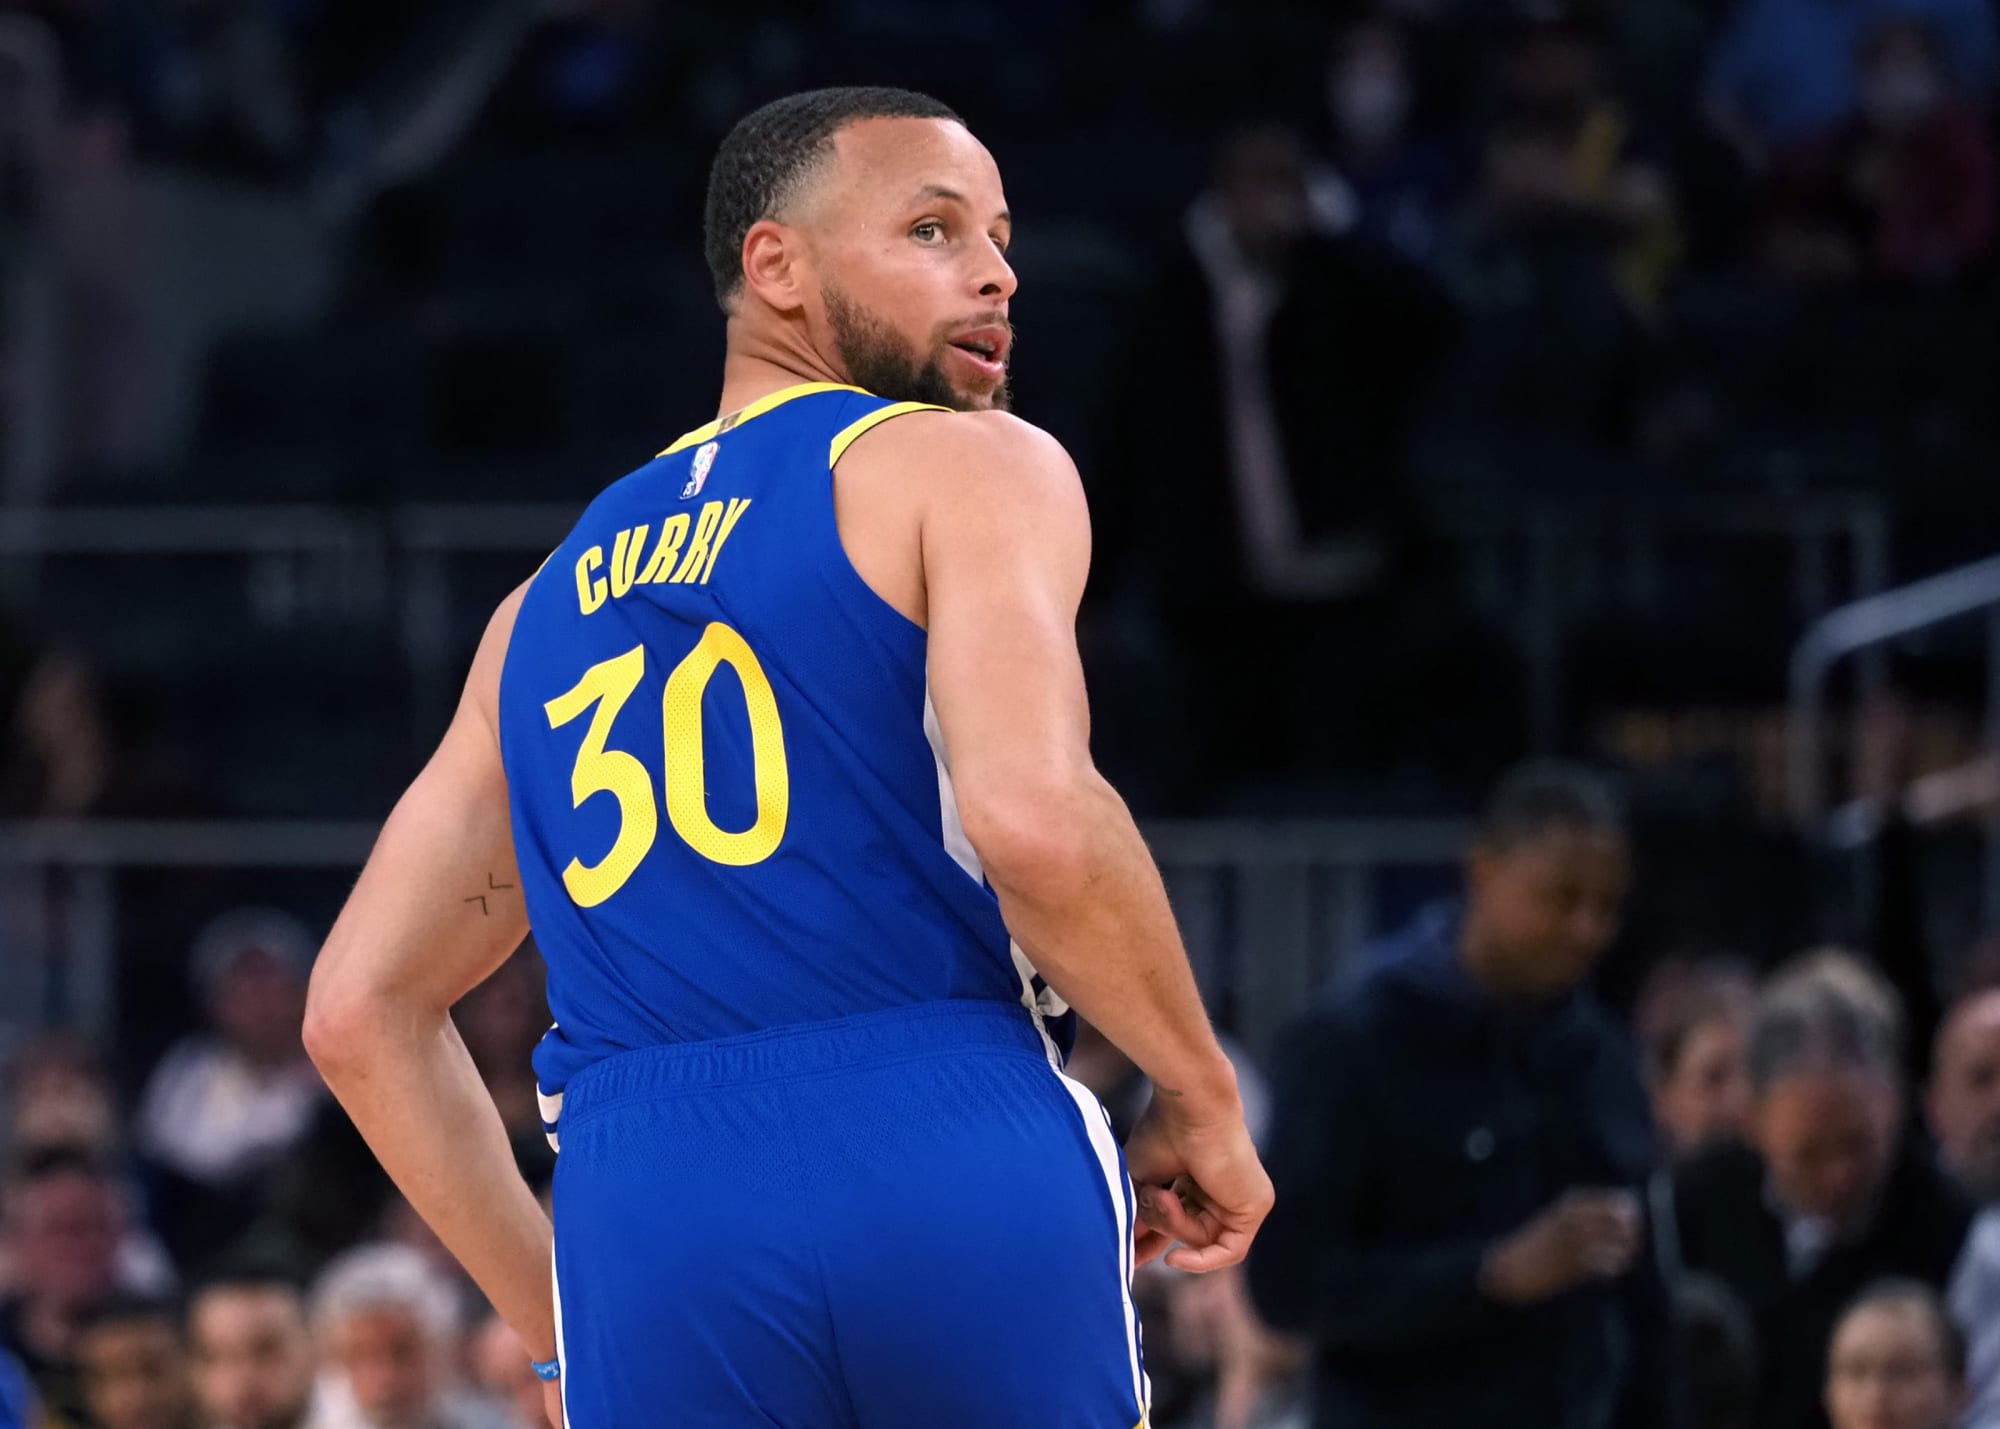 Watch: Mavs vendor trips Steph Curry and Warriors fans are furious